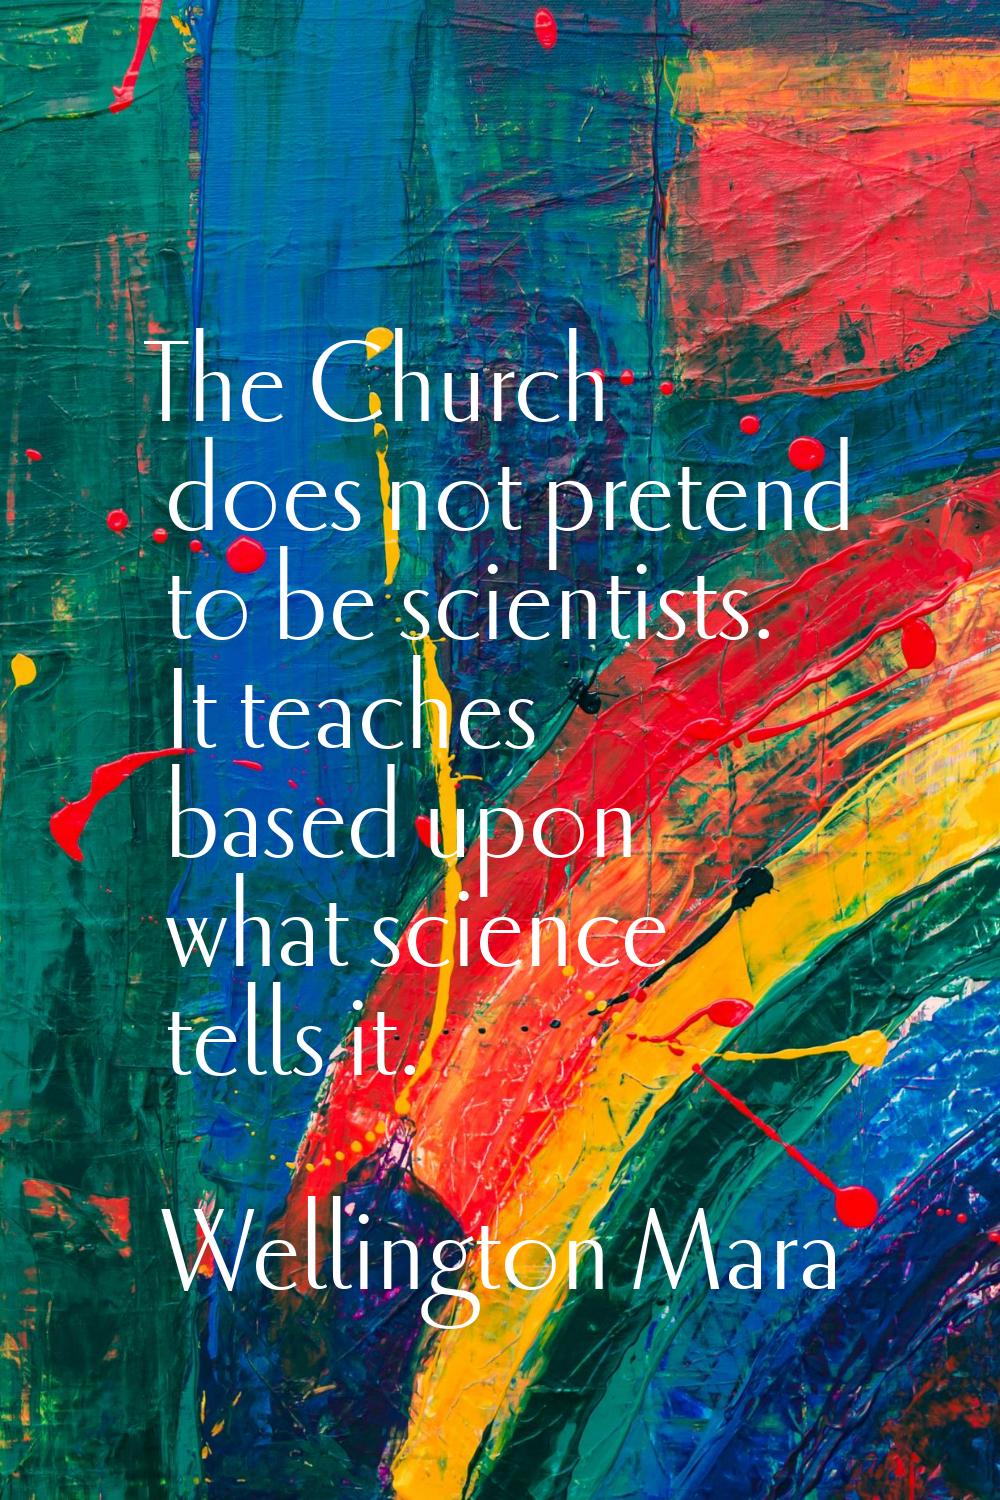 The Church does not pretend to be scientists. It teaches based upon what science tells it.